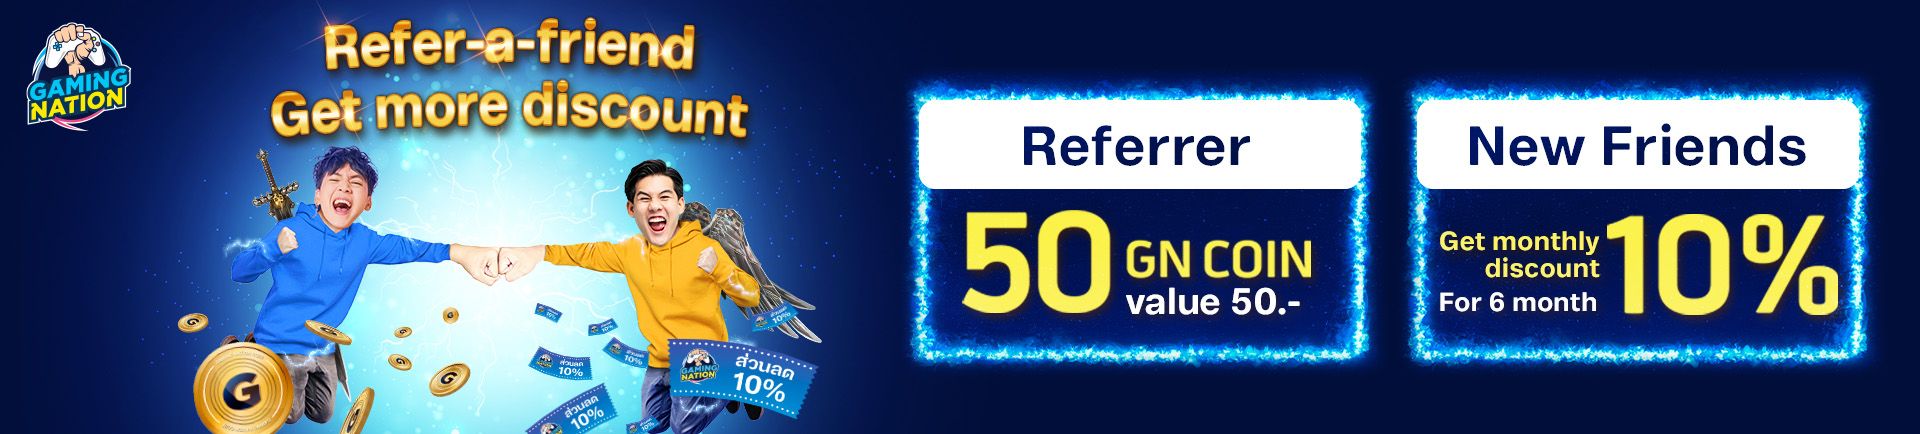 Refer-a-friend! Get more discount at Gaming Nation.